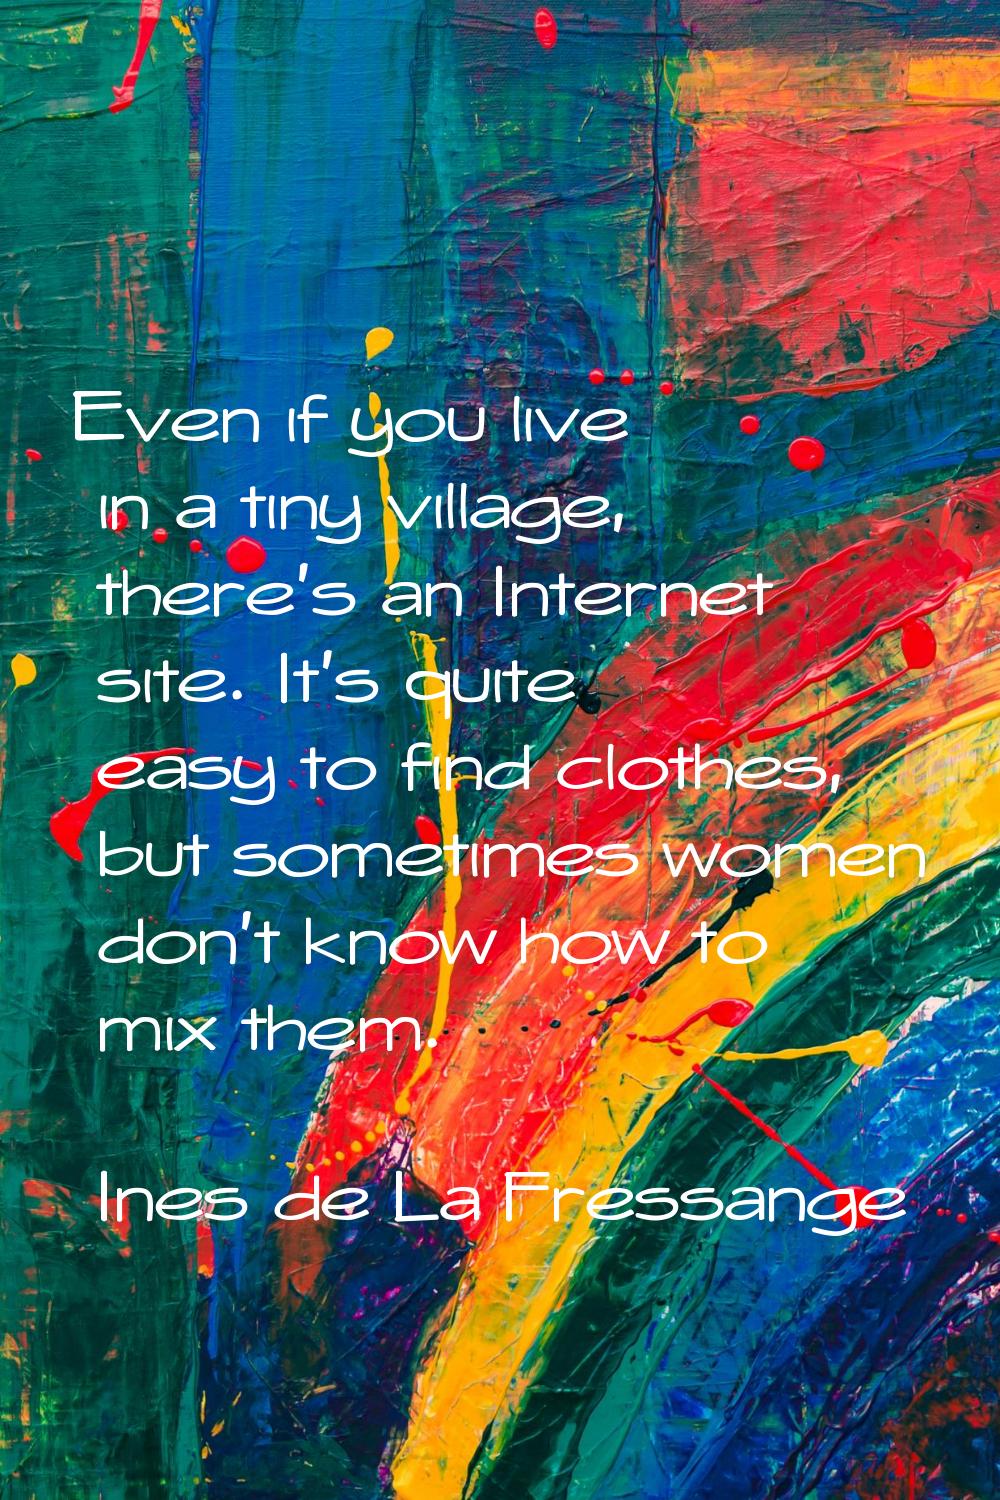 Even if you live in a tiny village, there's an Internet site. It's quite easy to find clothes, but 